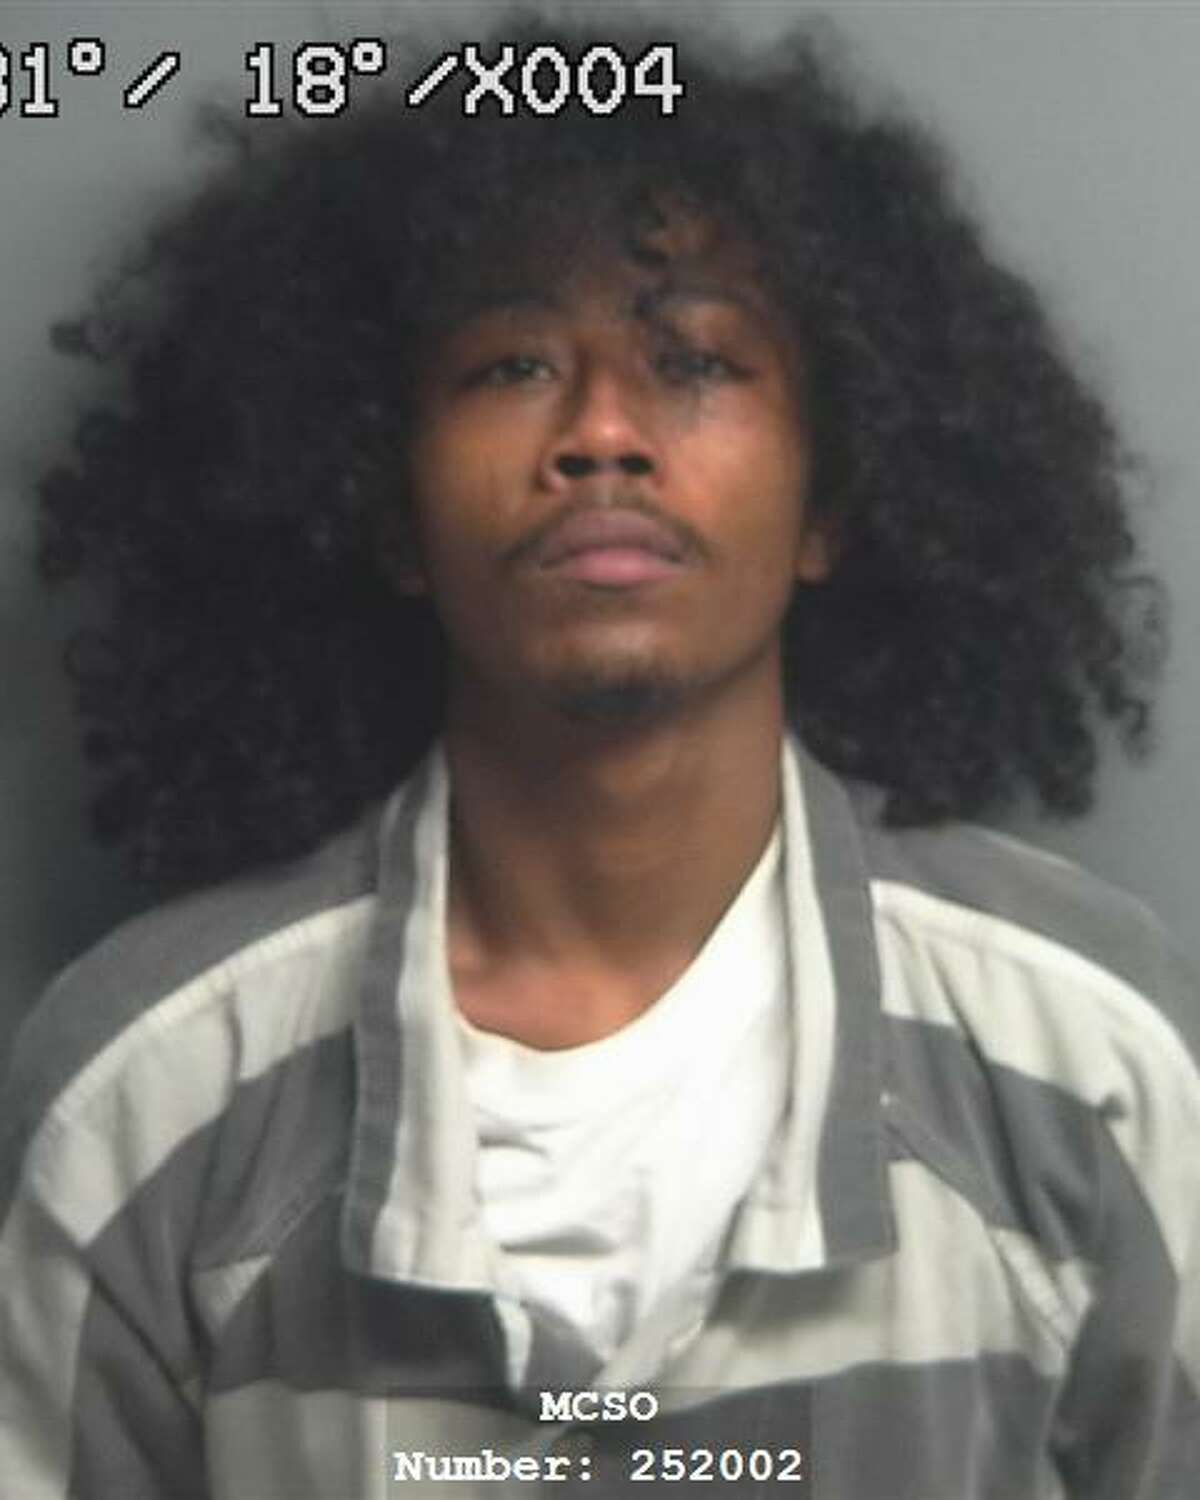 Deshandrea Marquez Jones, 20, of Conroe, is charged with deadly conduct by discharging a firearm, a third-degree felony.